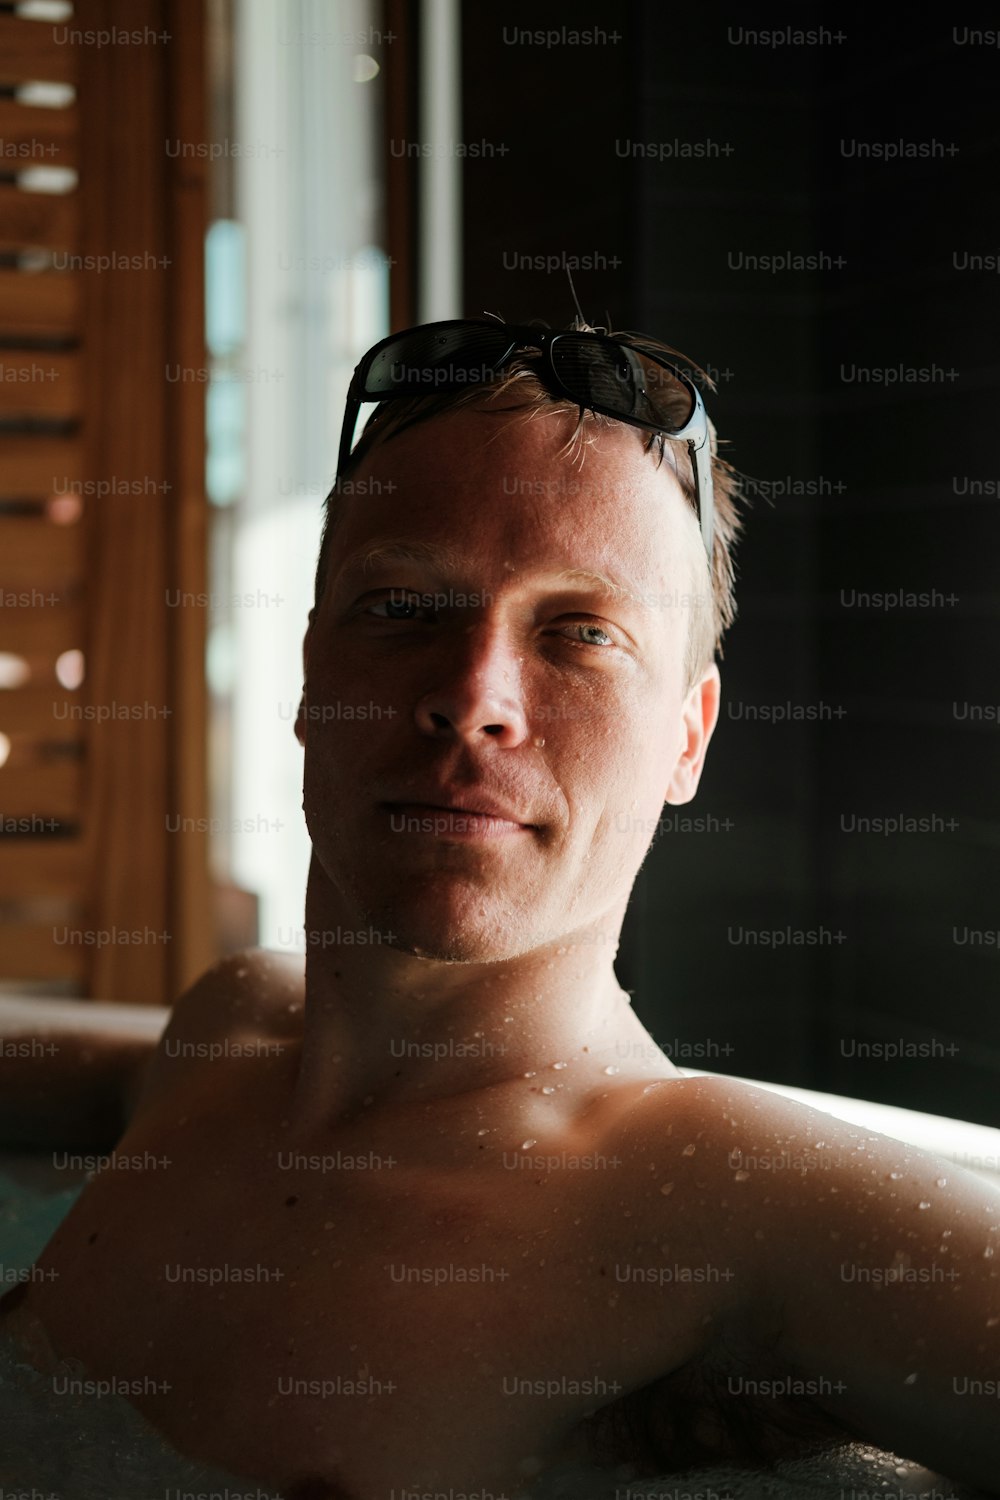 a man in a hot tub wearing sunglasses